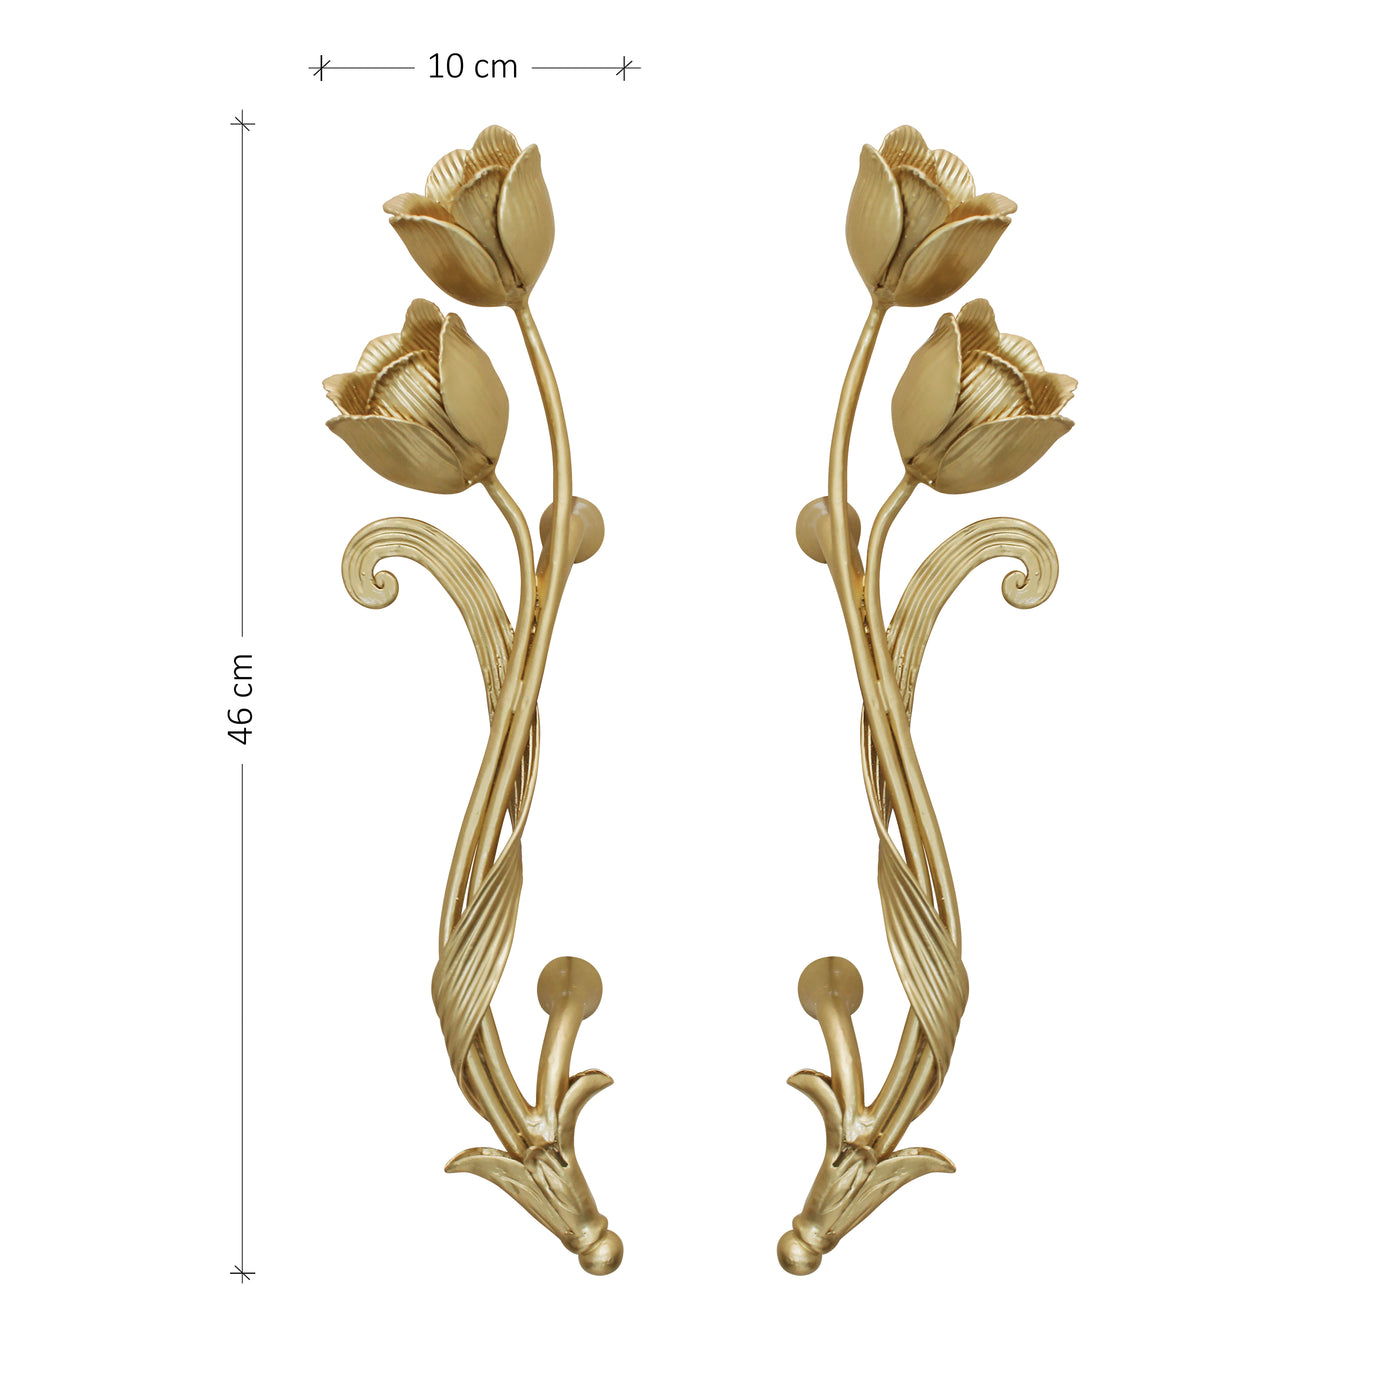 Pair of decorative pull handles inspired by tulips with annotated dimensions